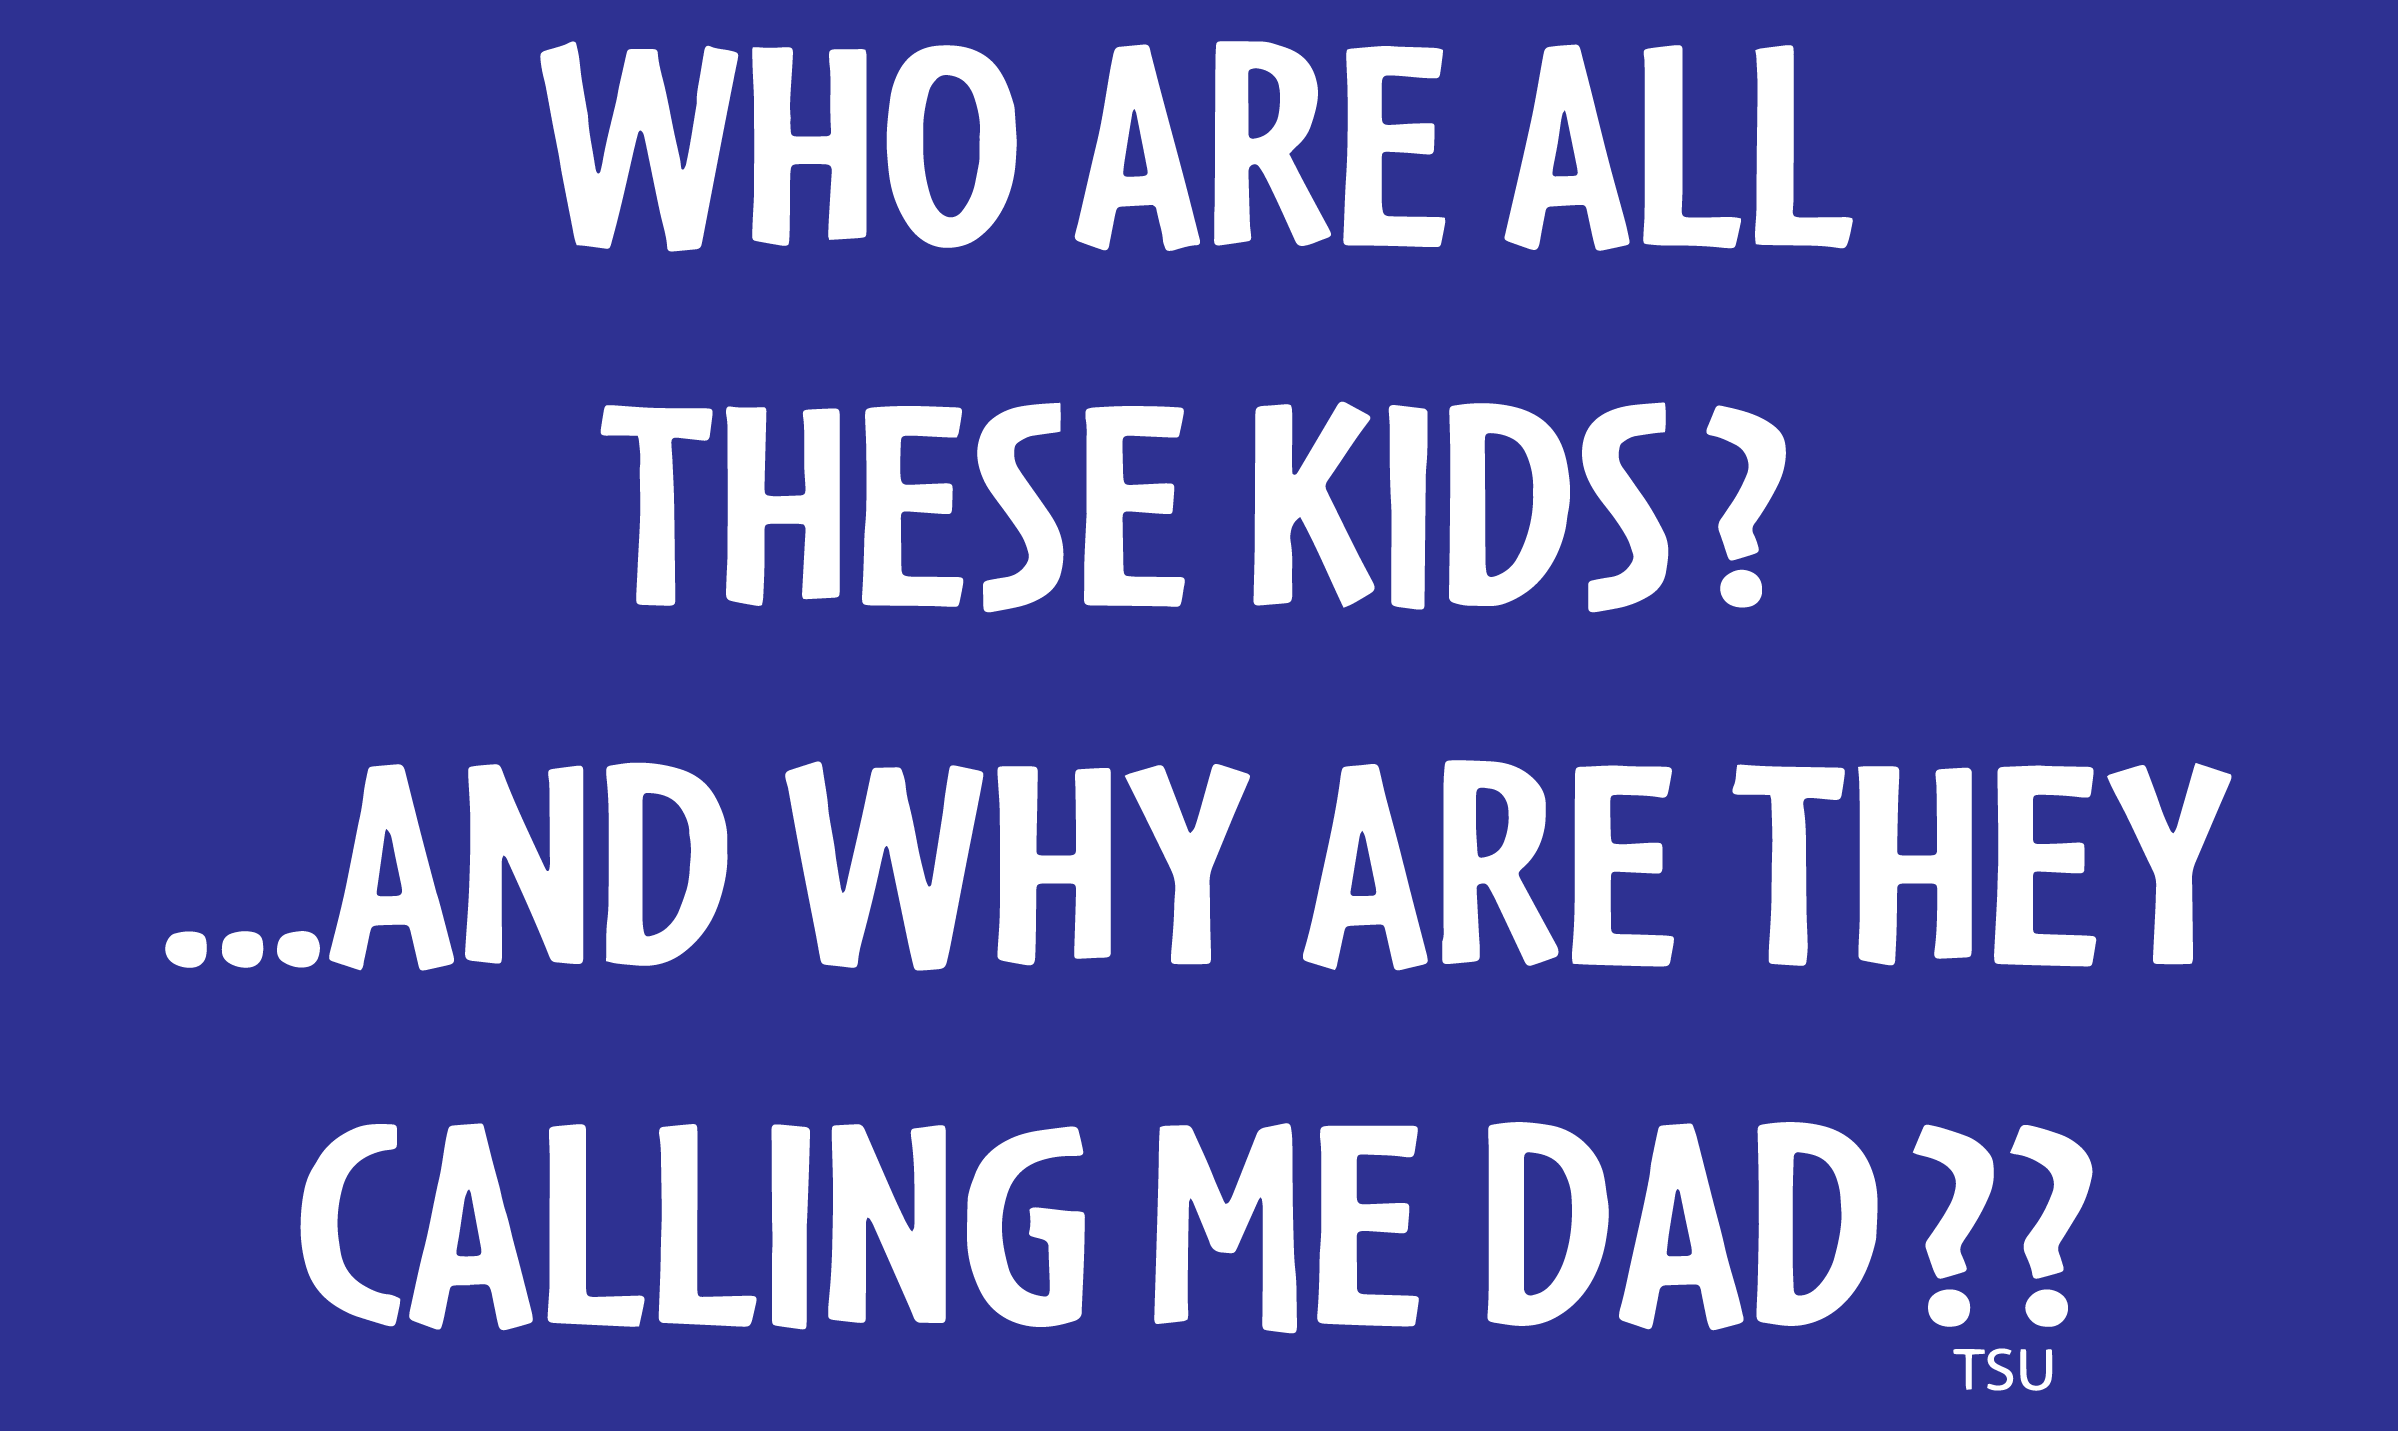 Who Are All Of These Kids & Why Are They Calling Me Dad? Funny Men T Shirt - TeeShirtUniversity.com